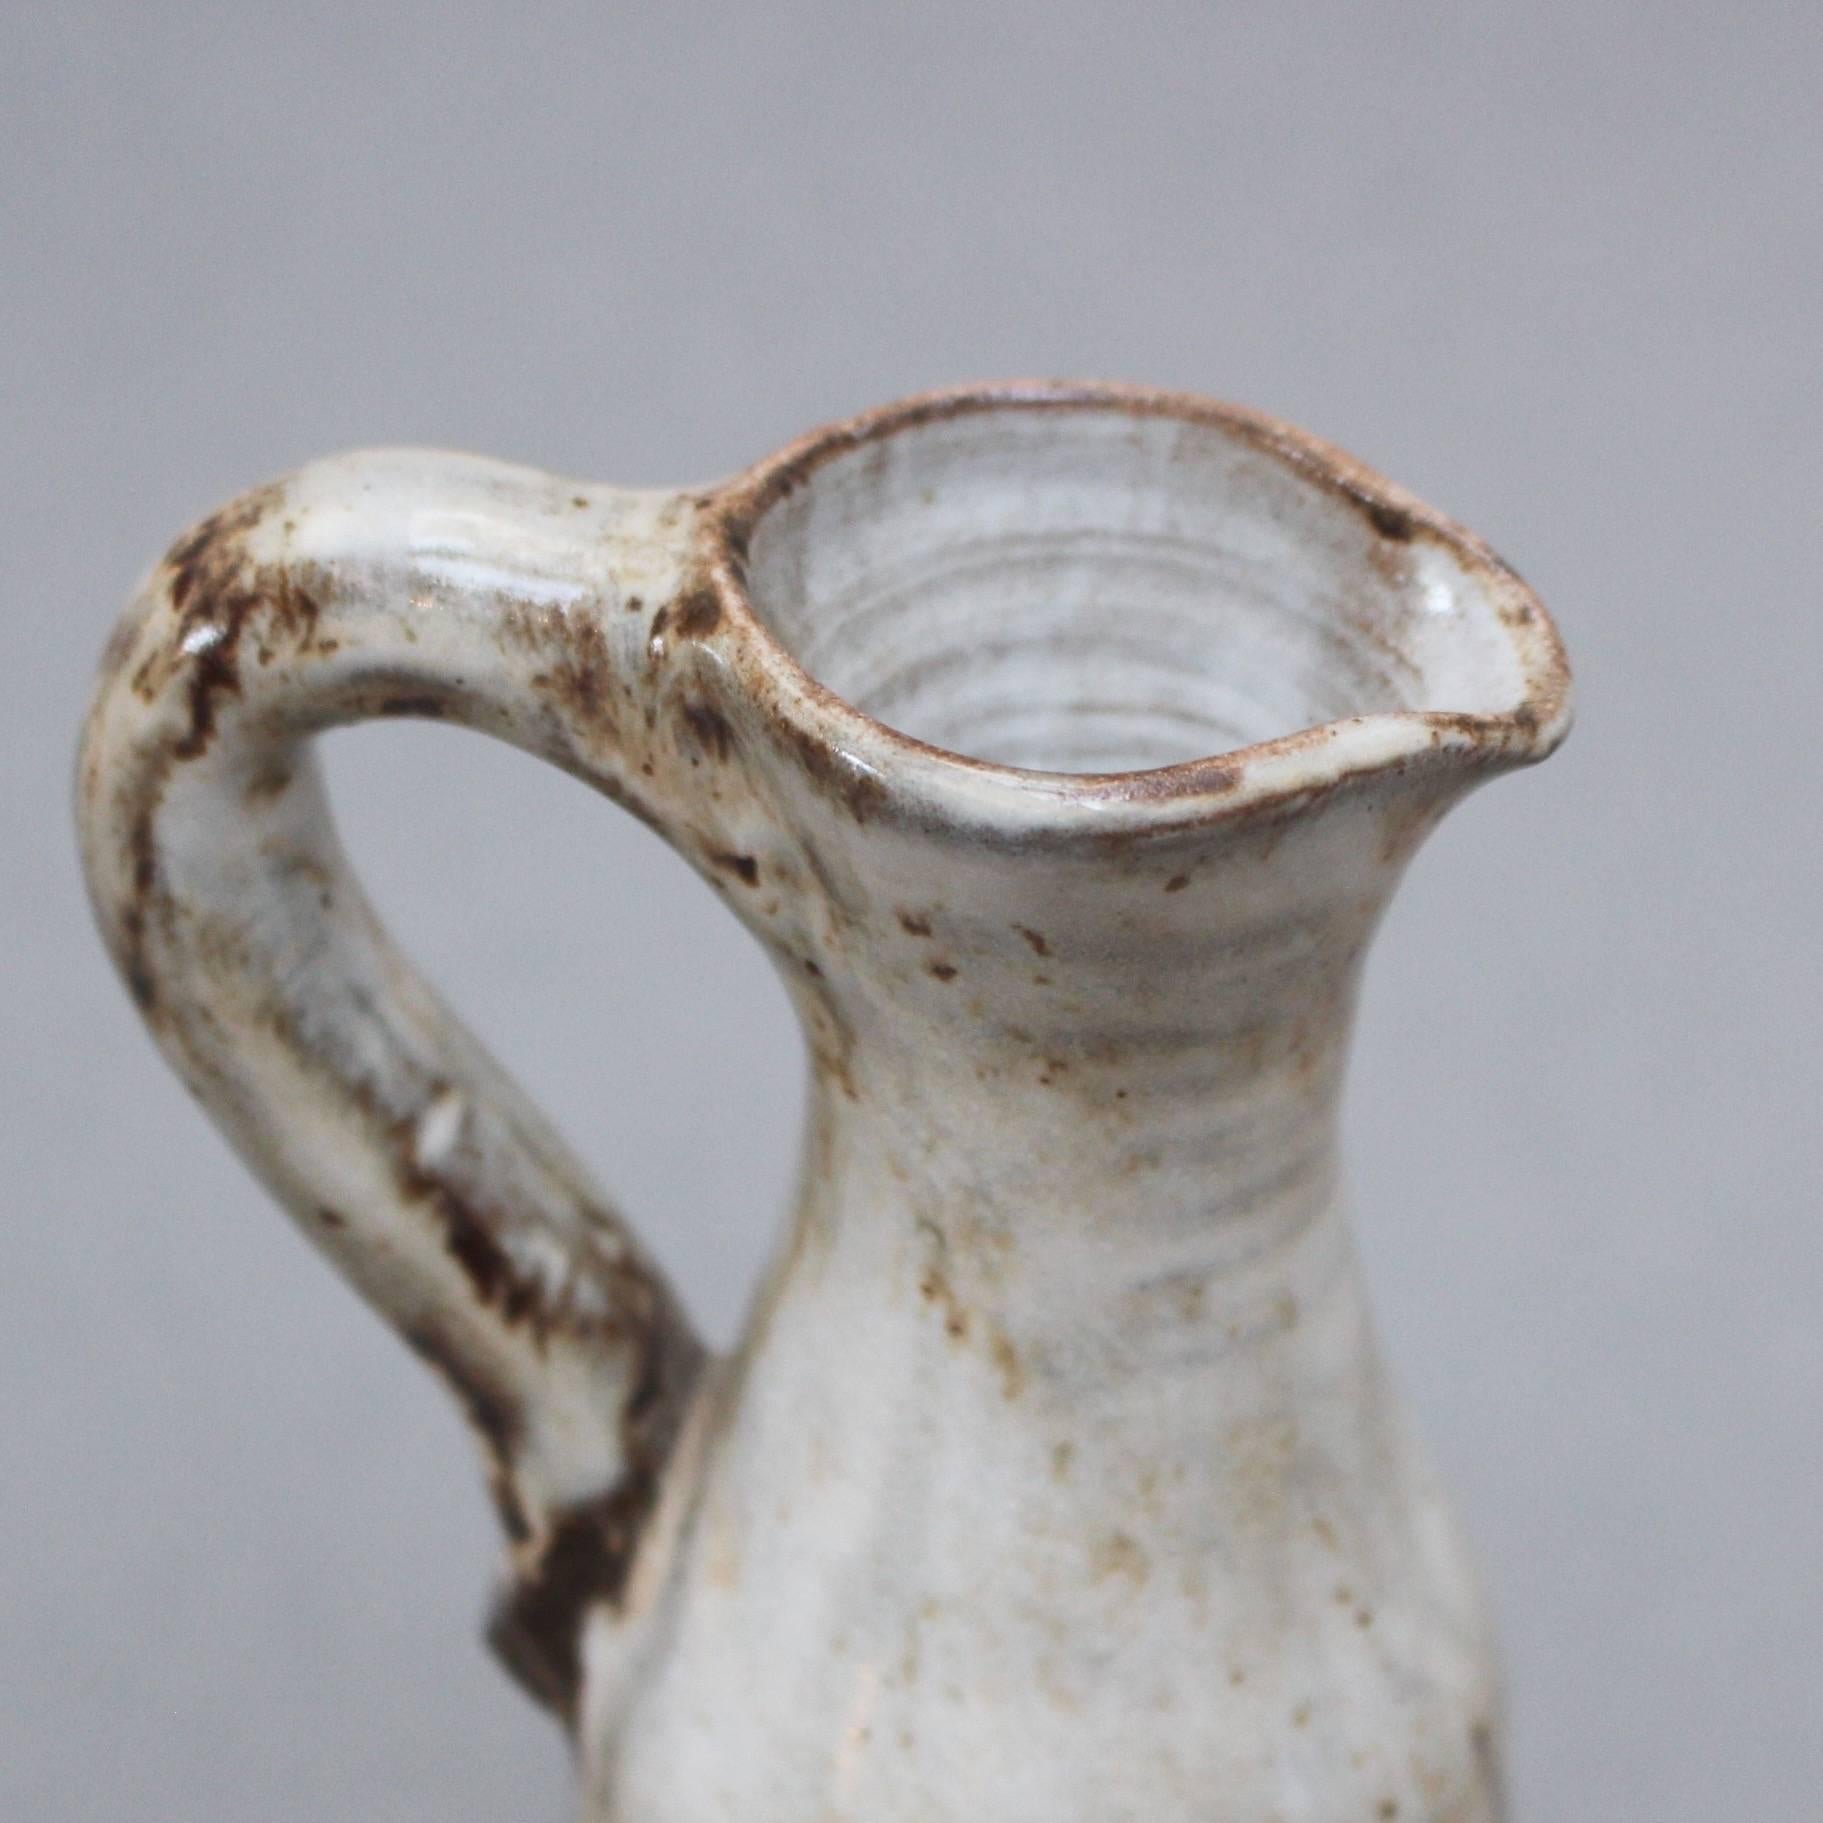 Glazed Small Ceramic Jug with Handle by Jacques Pouchain, circa 1960s